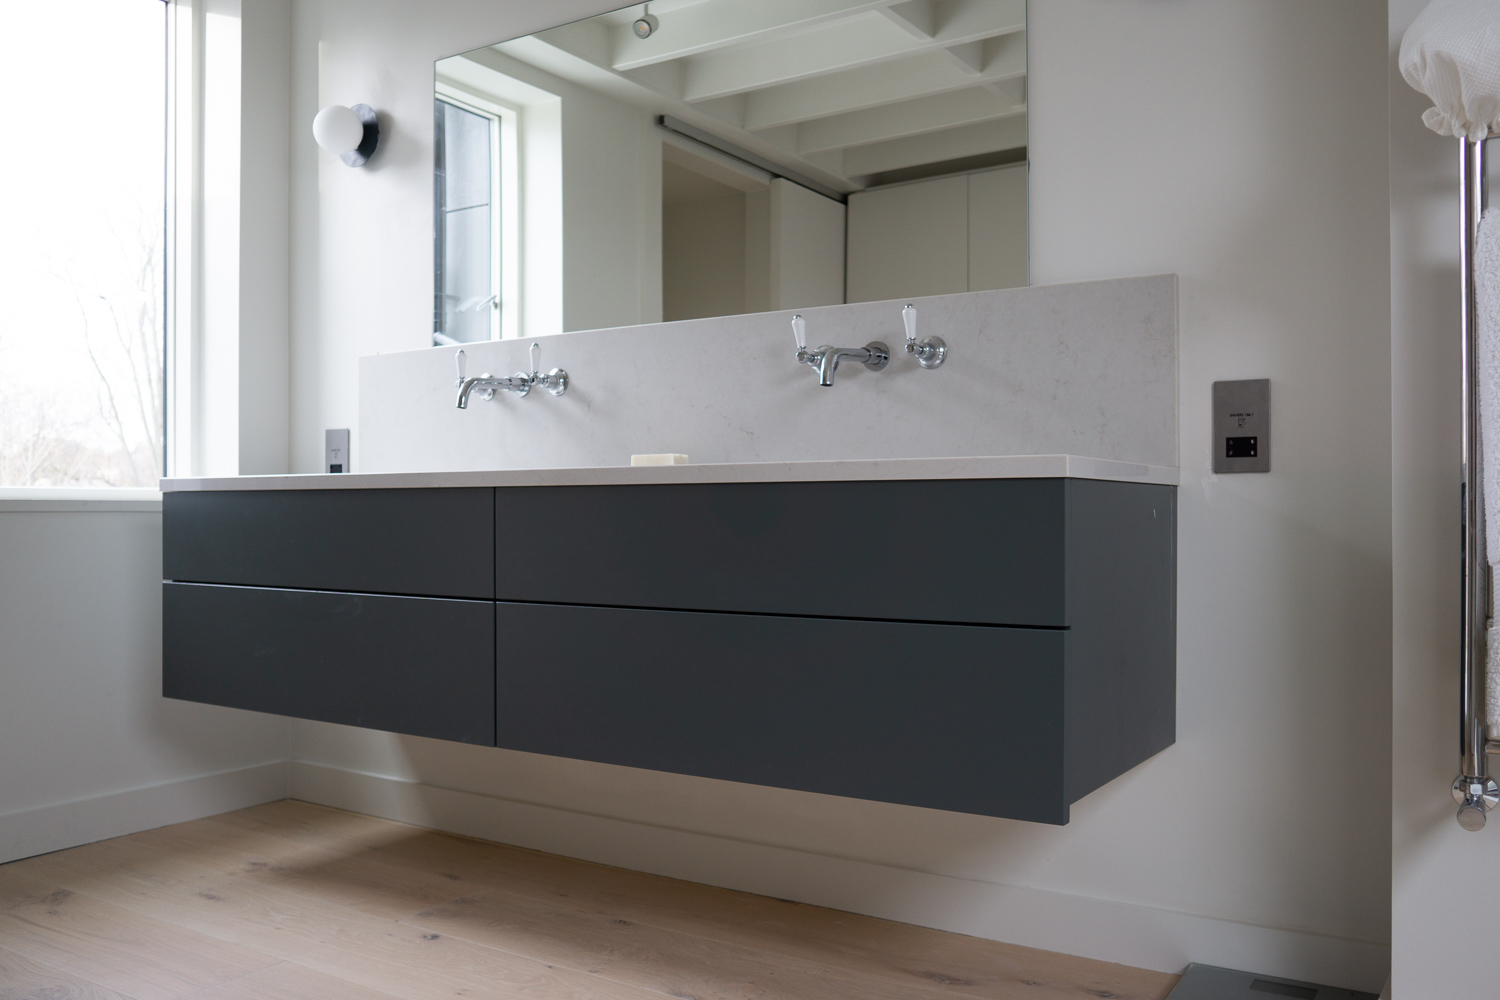 TENNYSON ROAD, Cesar Stone vanity mounted as floating countertop all drawers functional around plumbing
